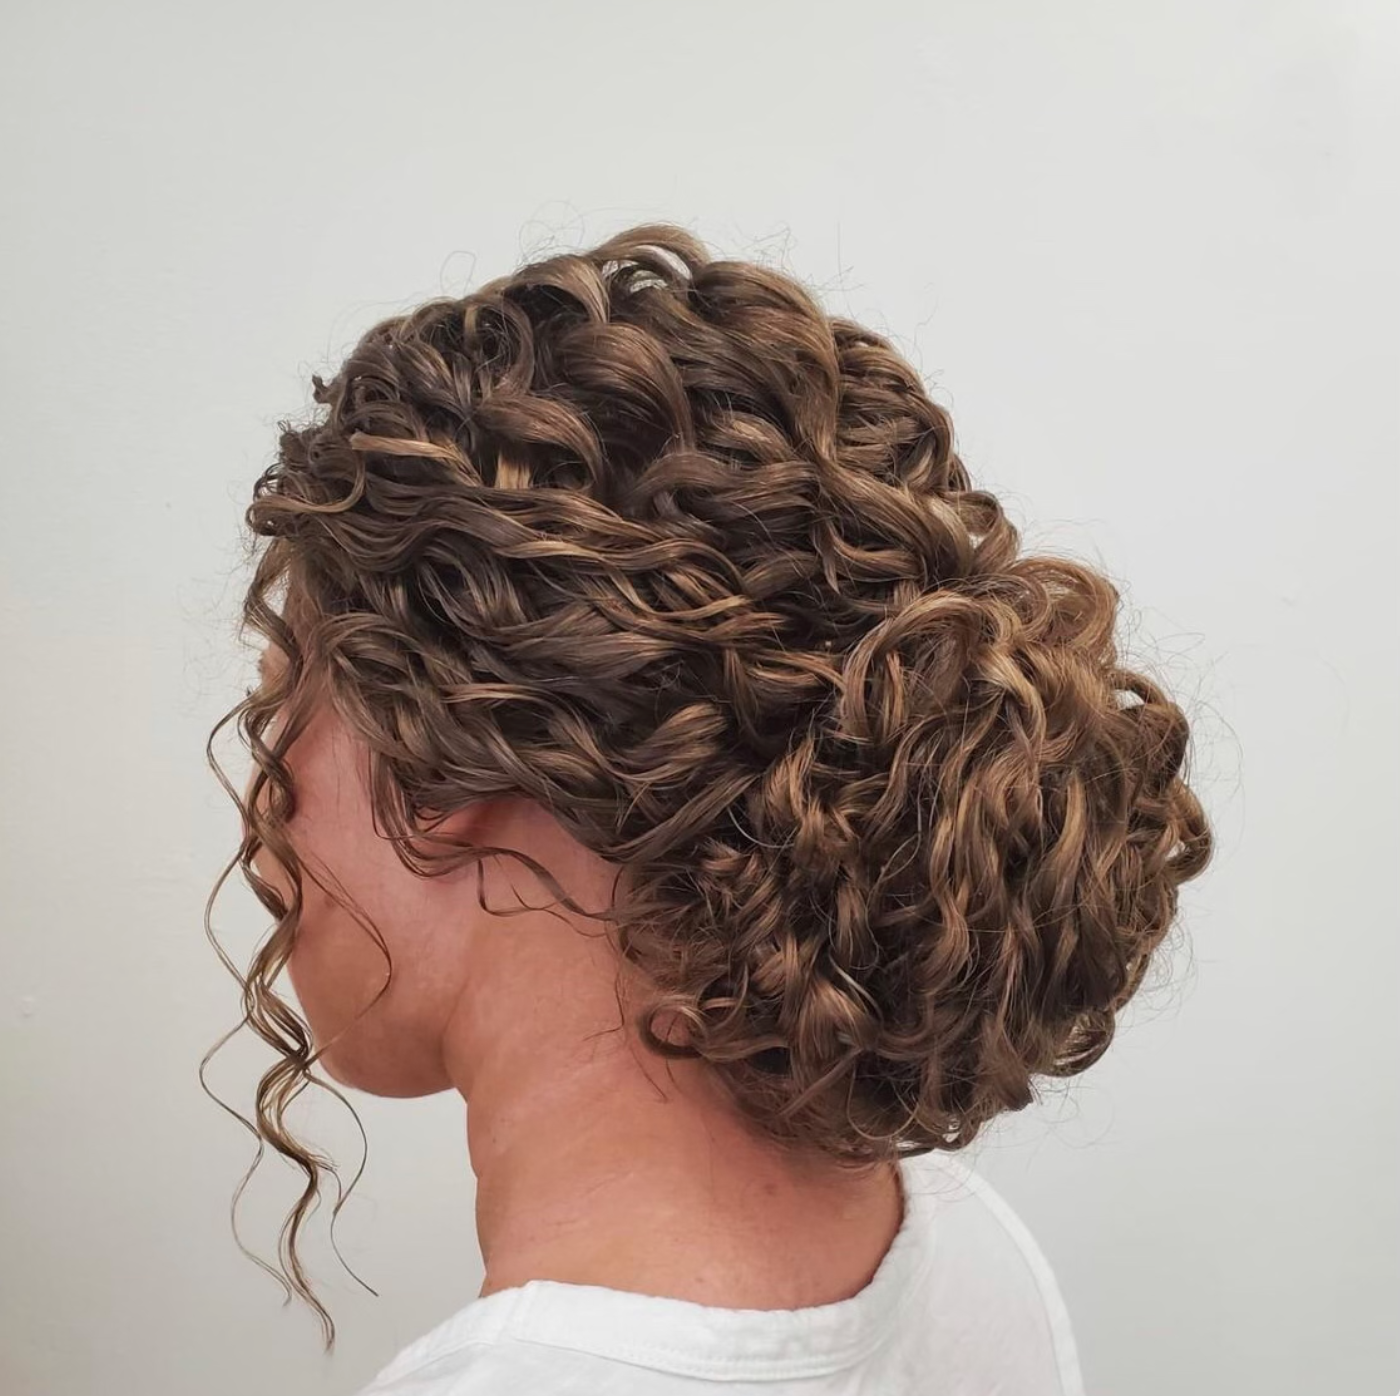 Curly Hair Bridal Style Updo